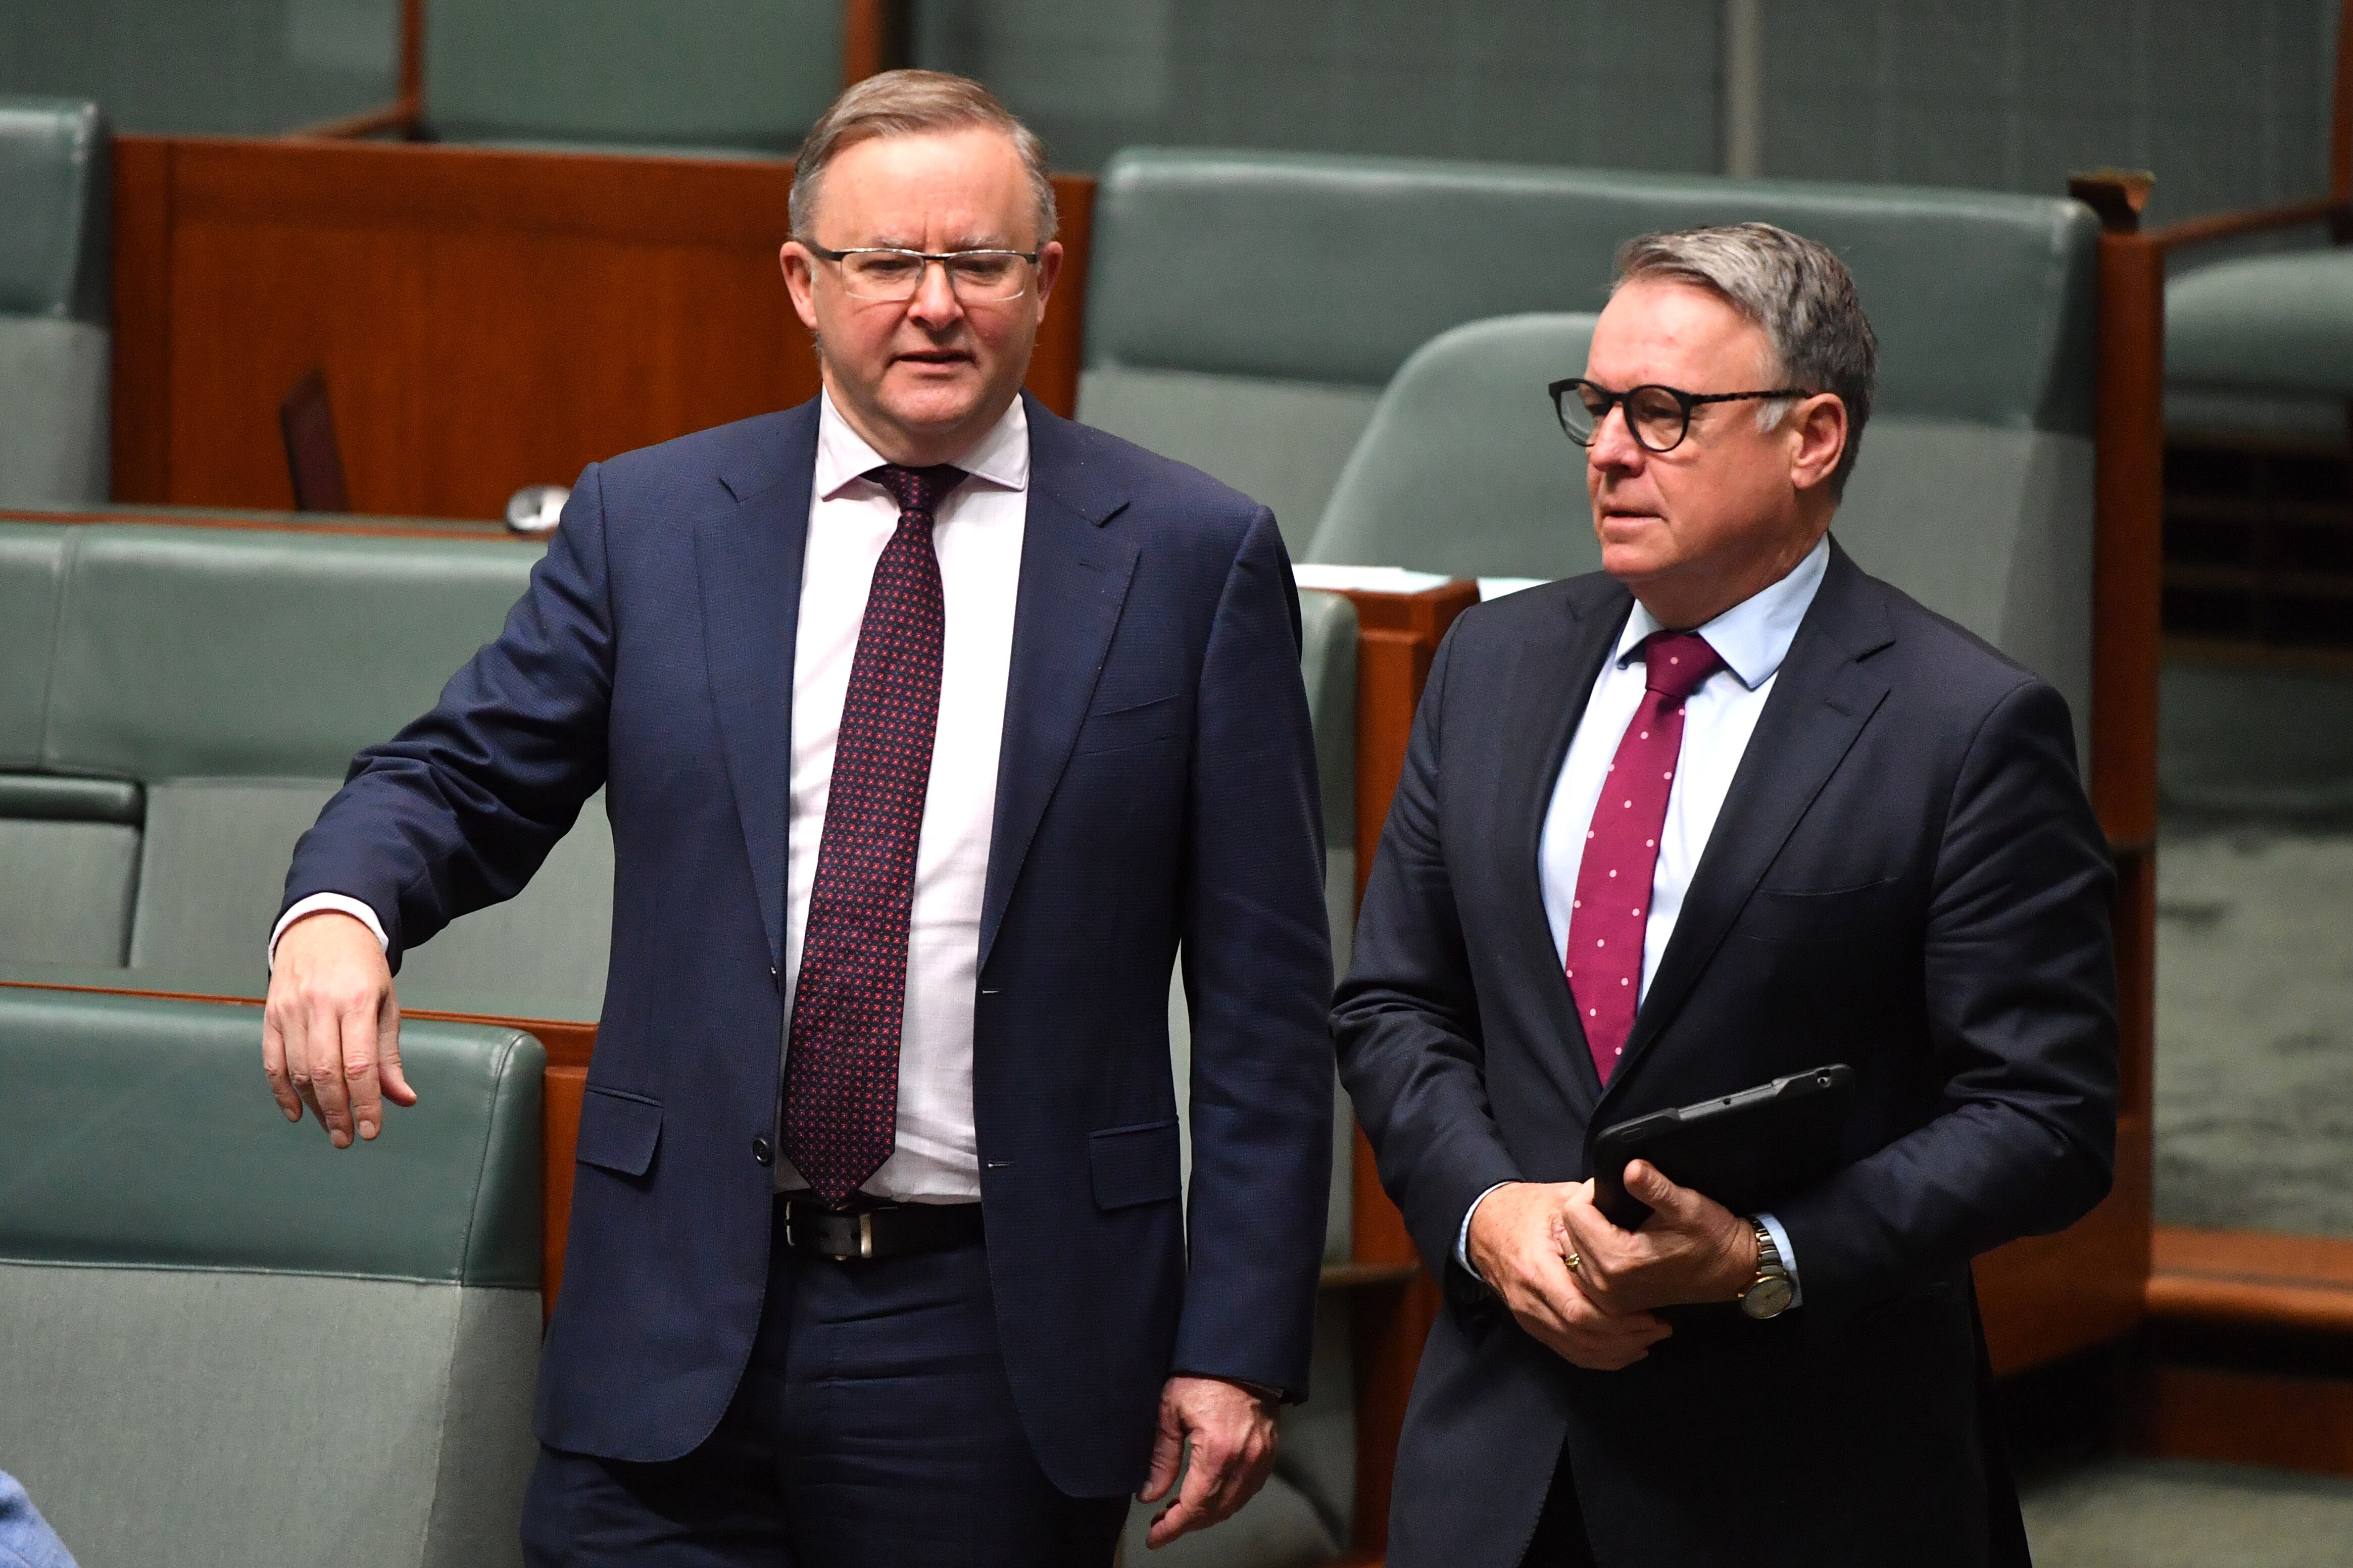 Opposition leader Anthony Albanese and former Shadow Minister for Agriculture Joel Fitzgibbon in the House of Representatives at Parliament House in Canberra.